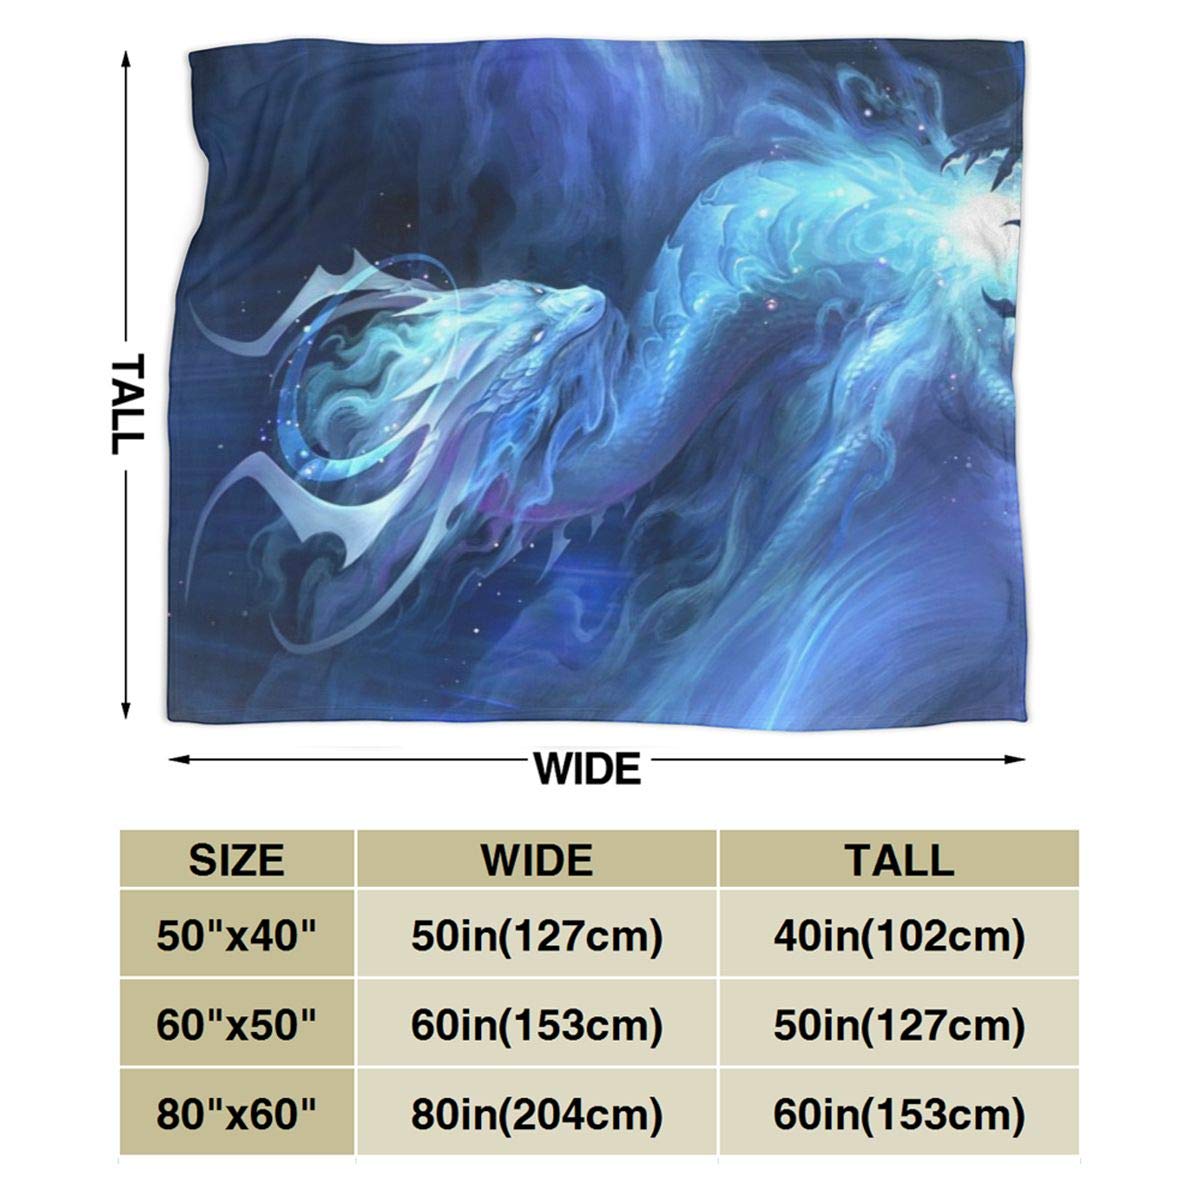 WAZHIJIA Meteor Dragon Fleece Throw Blanket, Fuzzy Warm Throws for Winter Bedding, Couch and Plush House Warming Decor Gift Idea 60"X50"